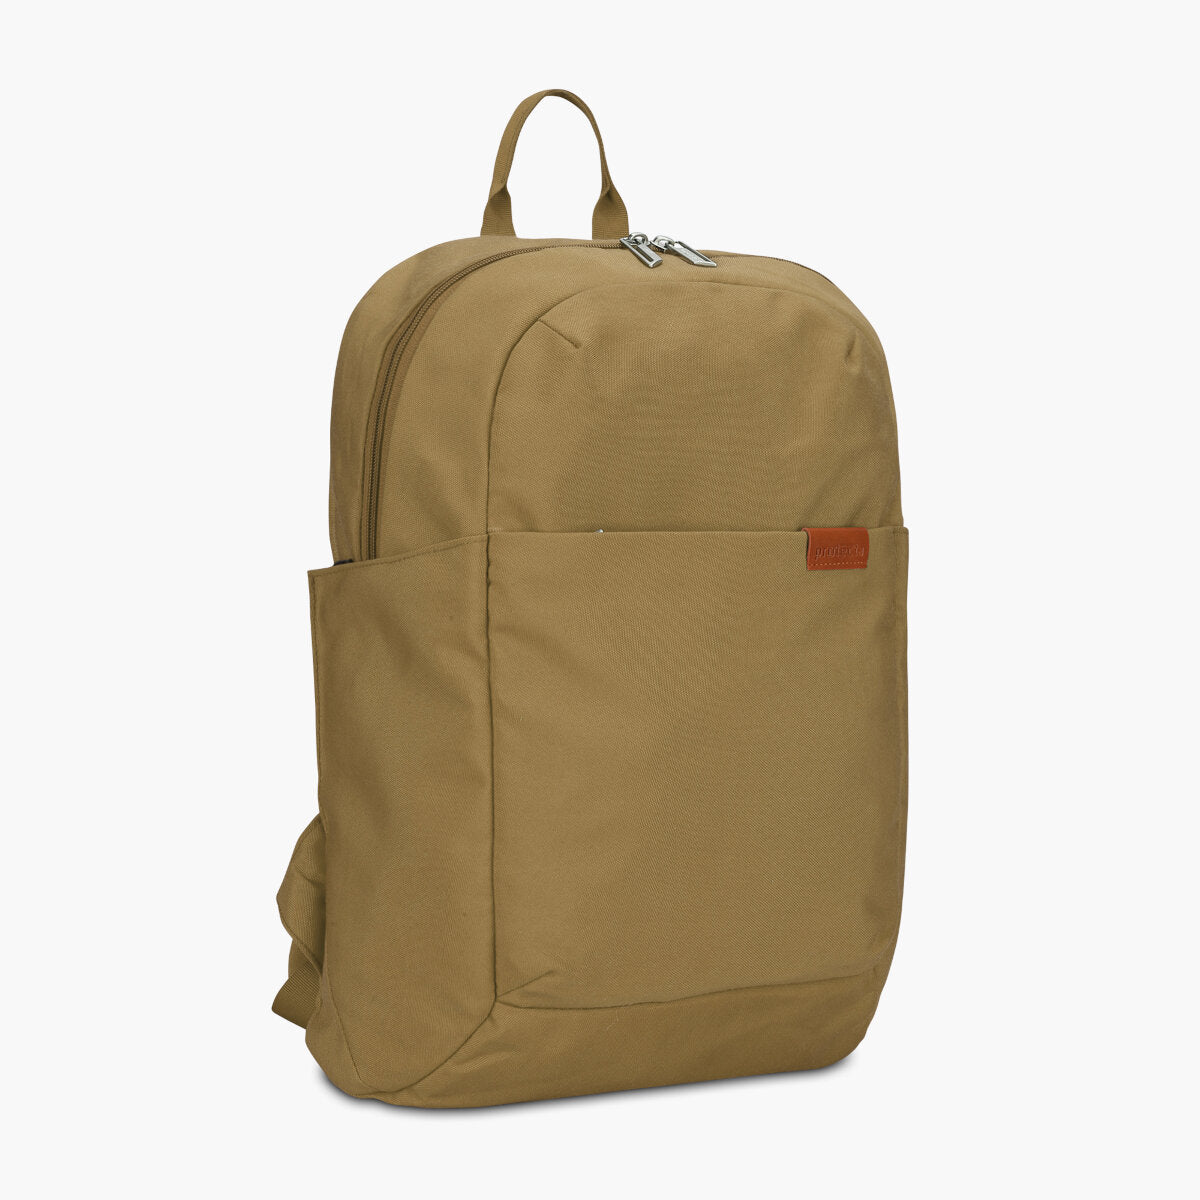 Beige | Protecta Strong Buzz Laptop Backpack - 2